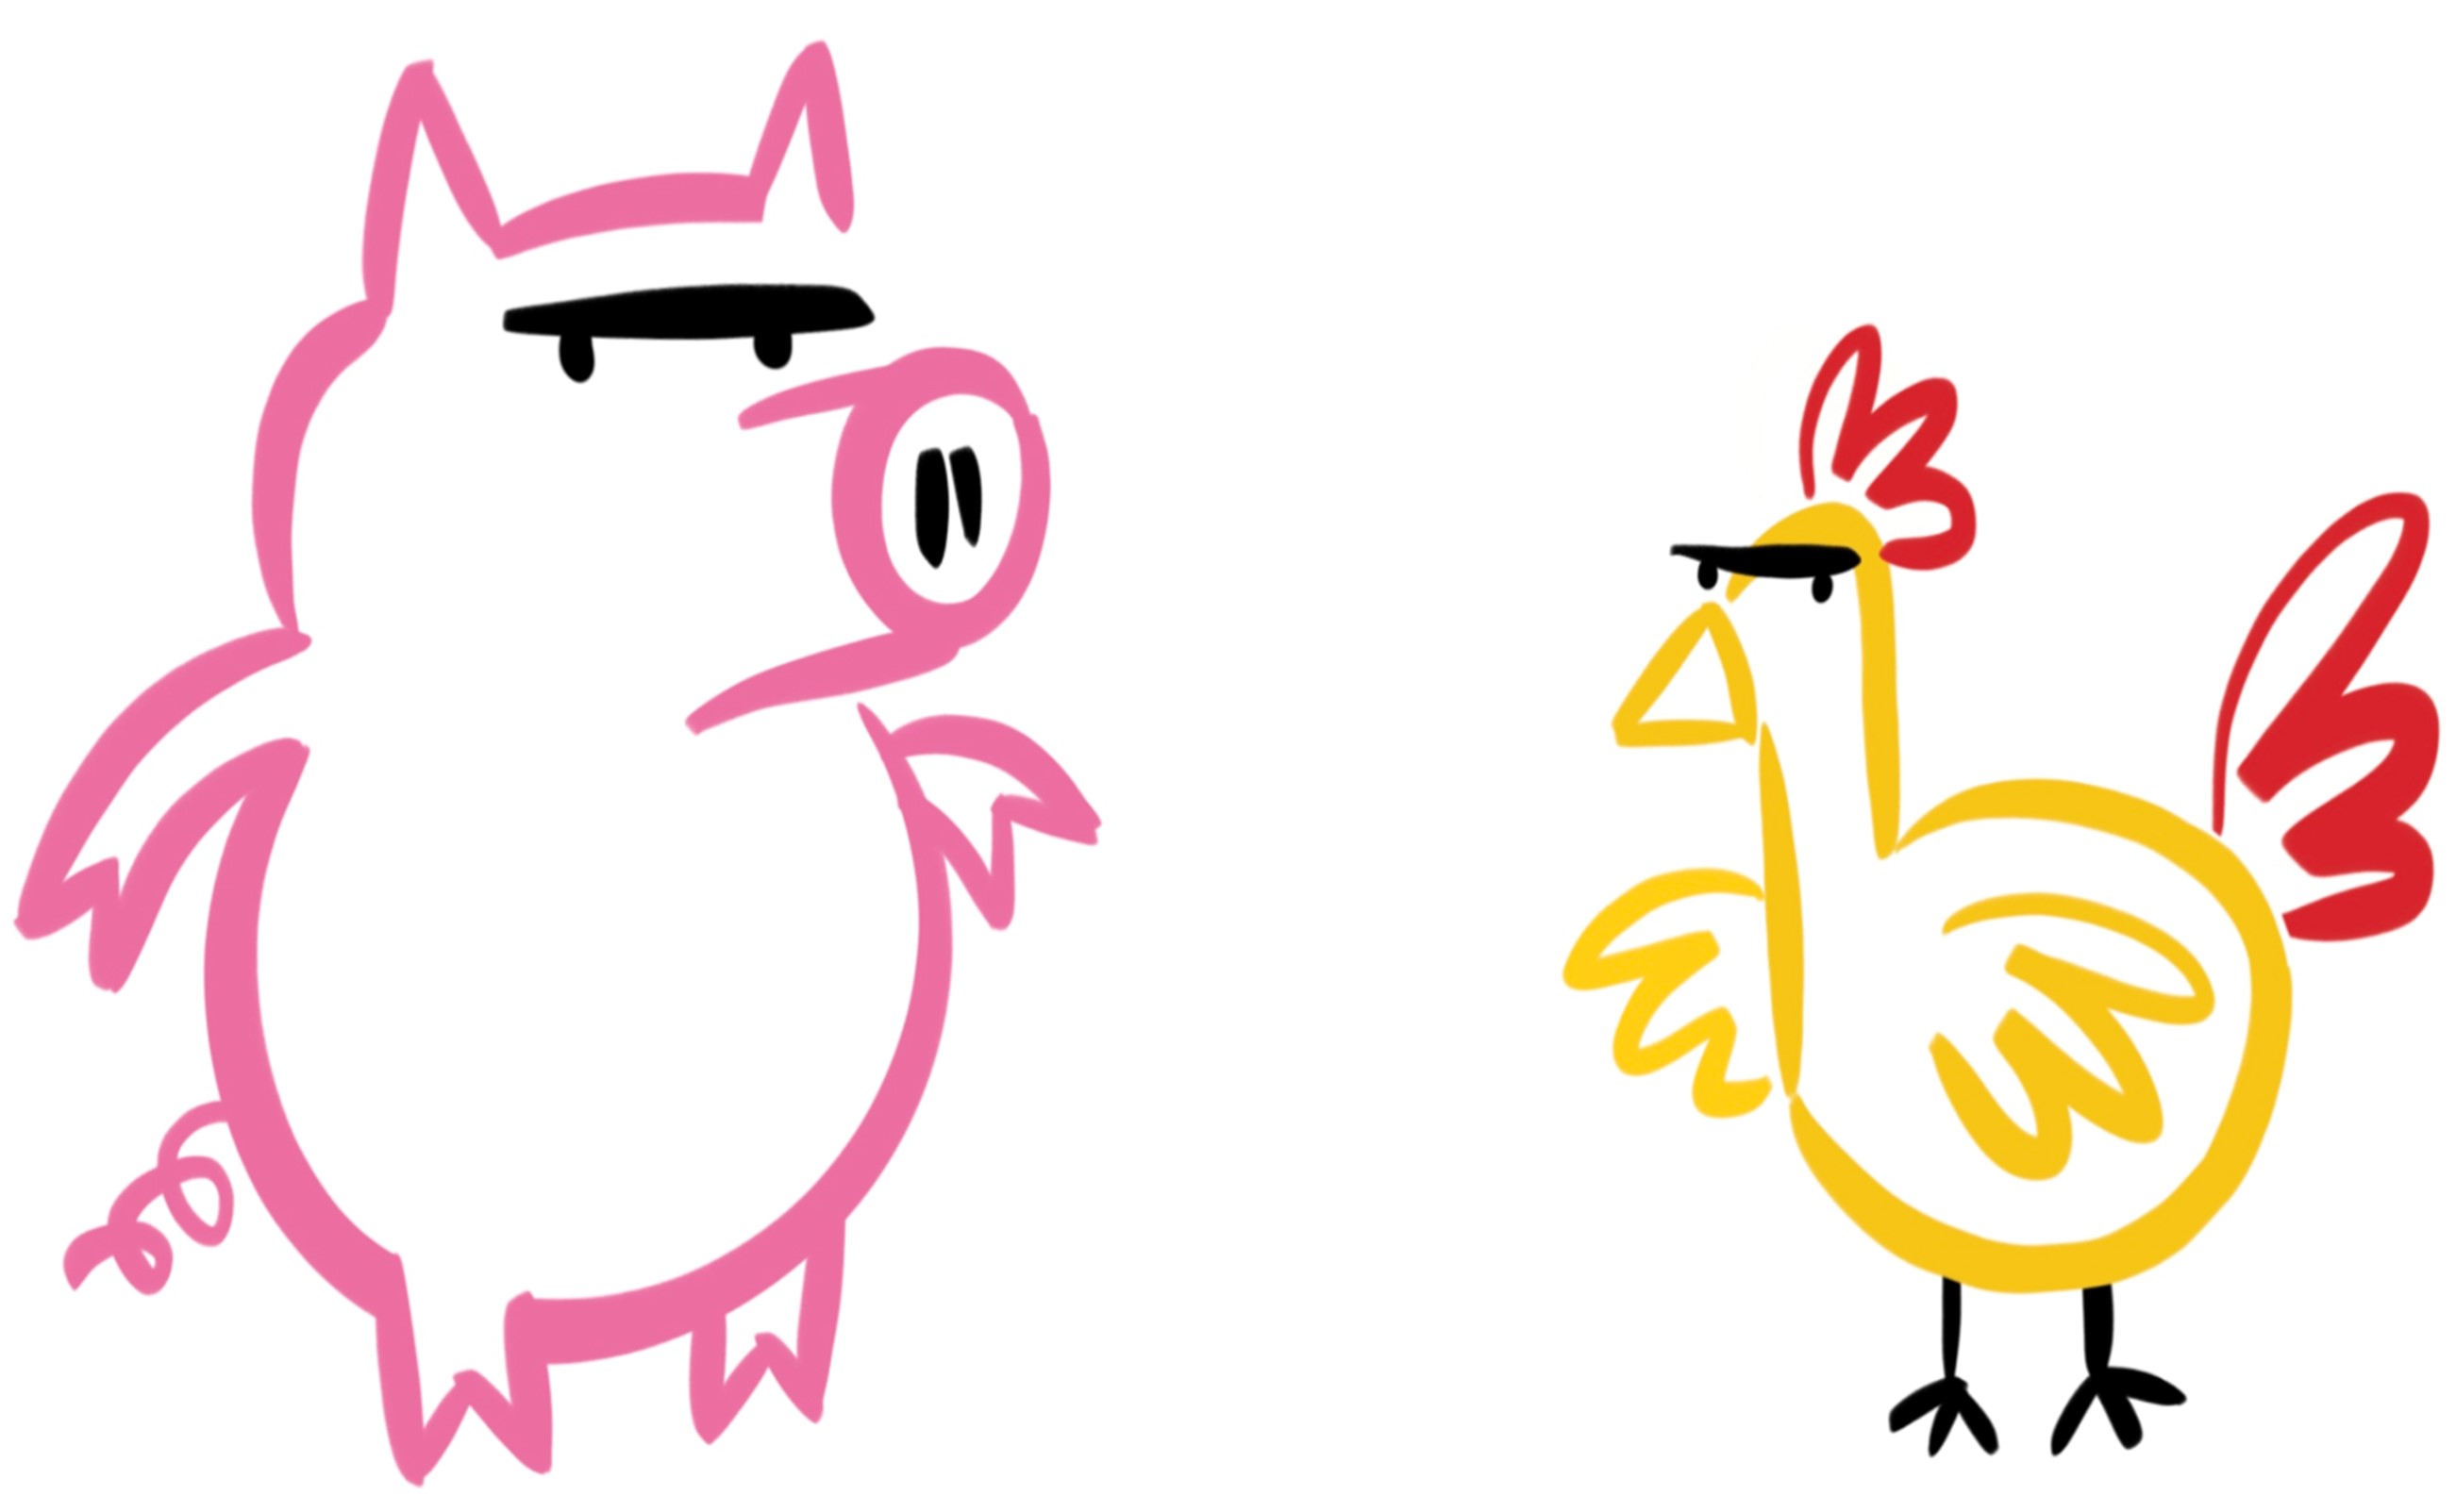 Drawing of an angry, pink pig and an angry, yellow chicken with a red tail.